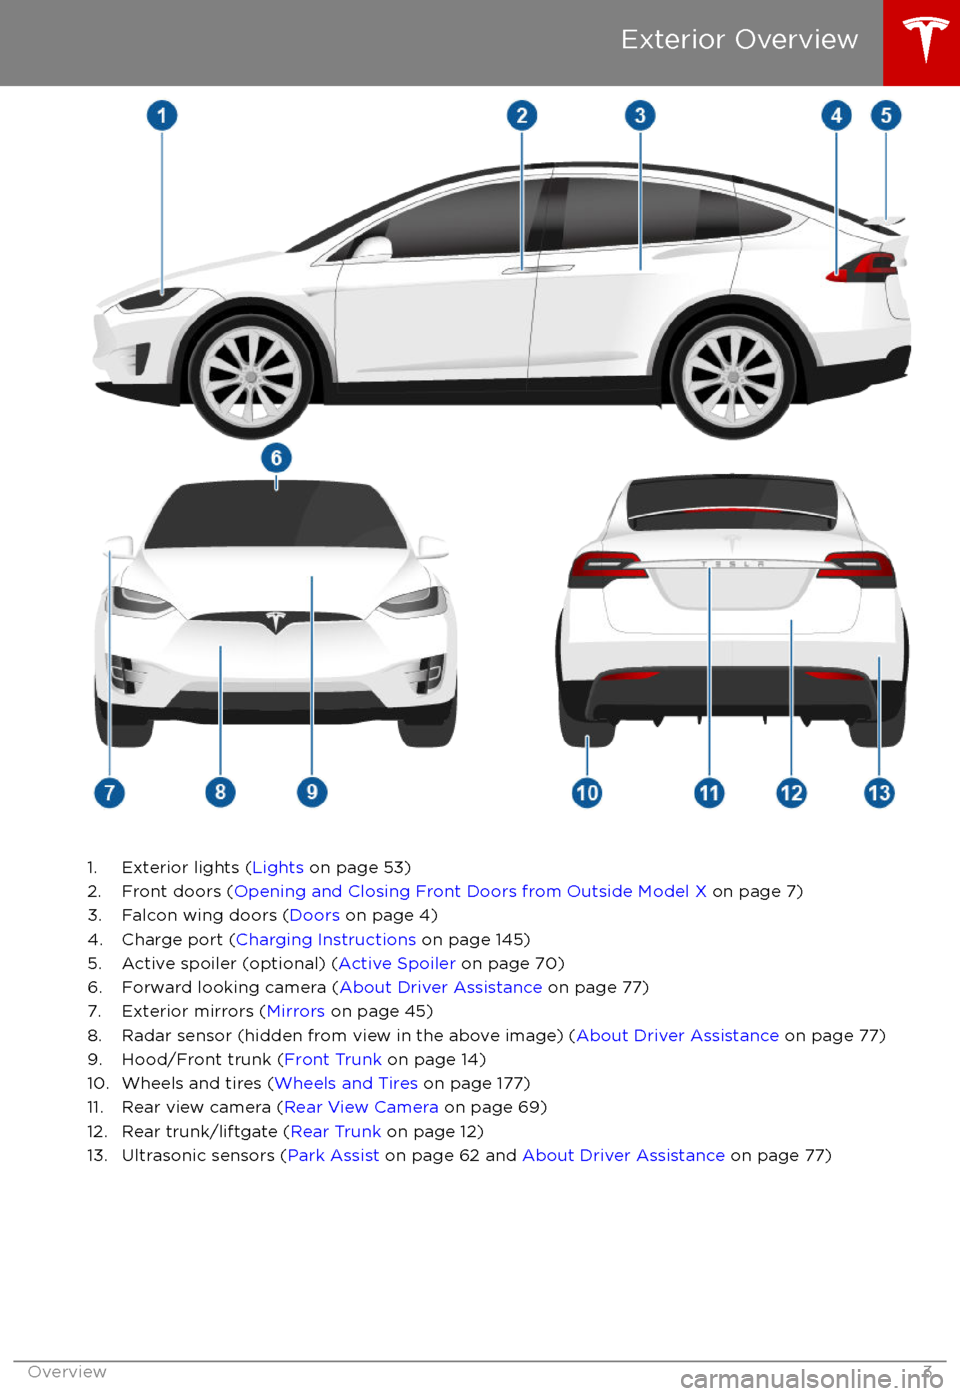 TESLA MODEL X 2017  Owners Manual (UK) 1. Exterior lights (Lights on page 53)
2. Front doors ( Opening and Closing Front Doors from Outside Model X  on page 7)
3. Falcon wing doors ( Doors on page 4)
4. Charge port ( Charging Instructions 